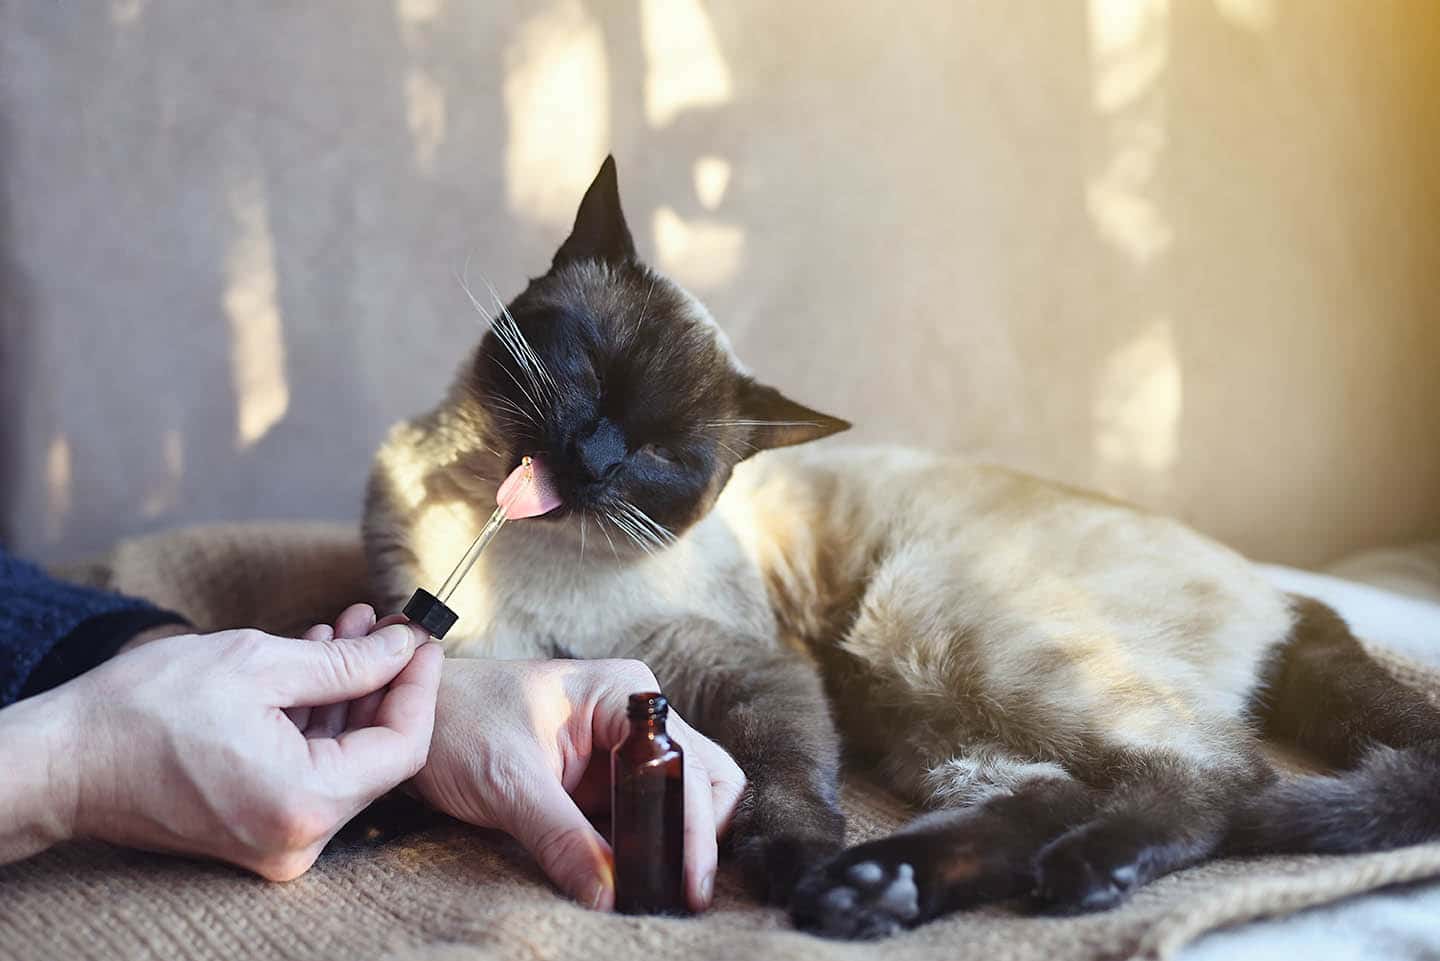 Man giving CBD oil to a cat